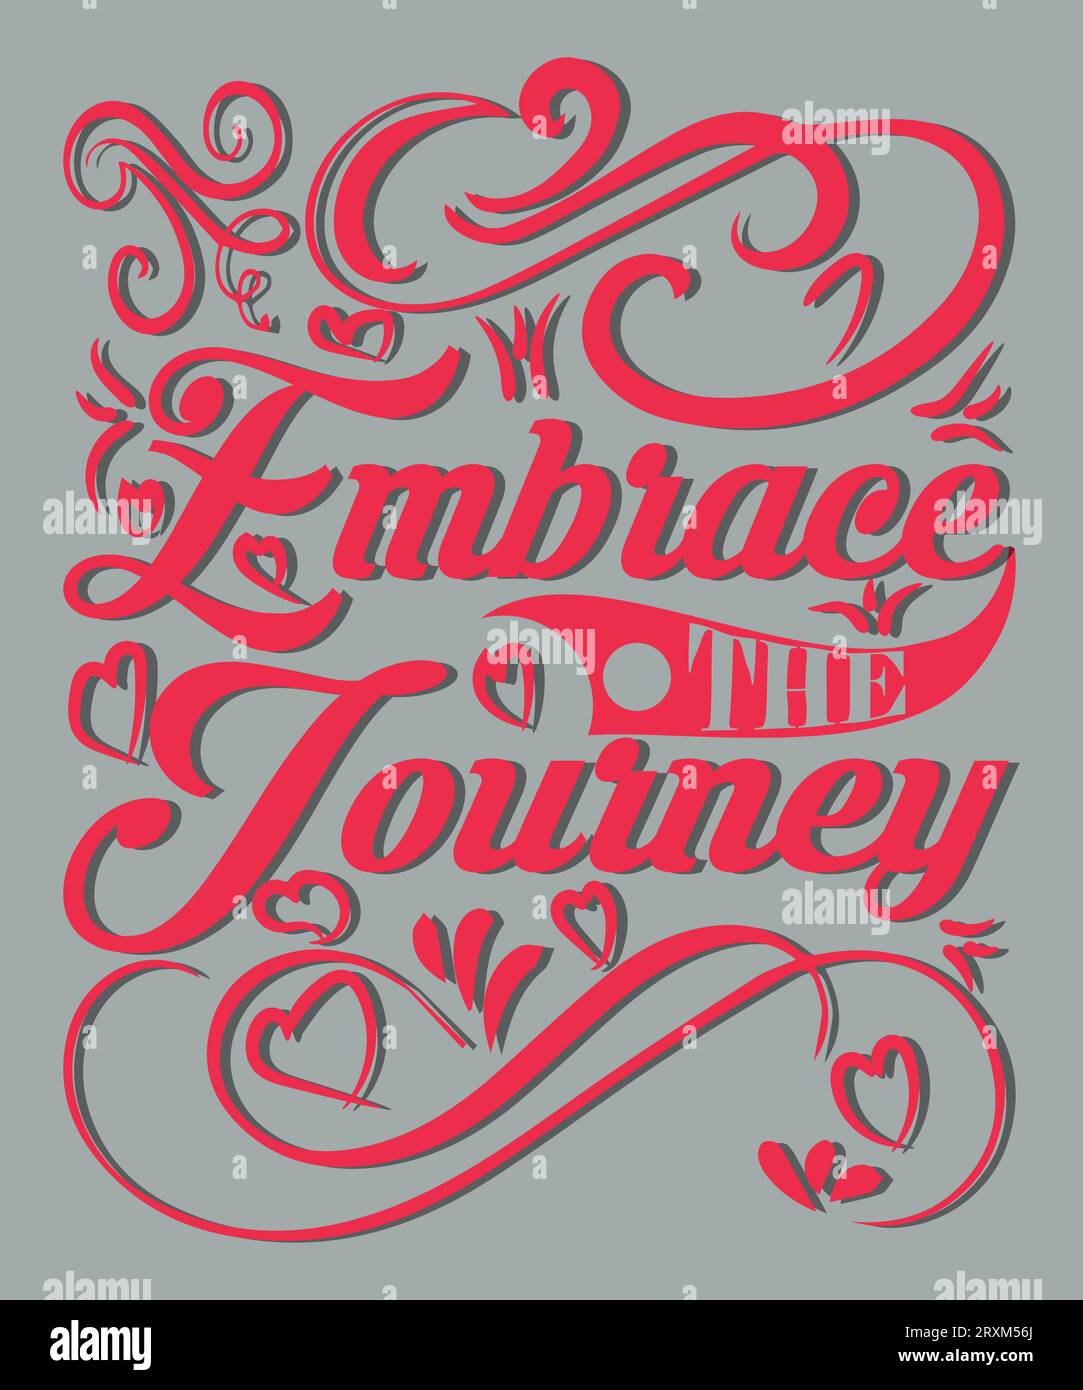 Motivational Typography, Poster, and T-shirt Design Stock Vector